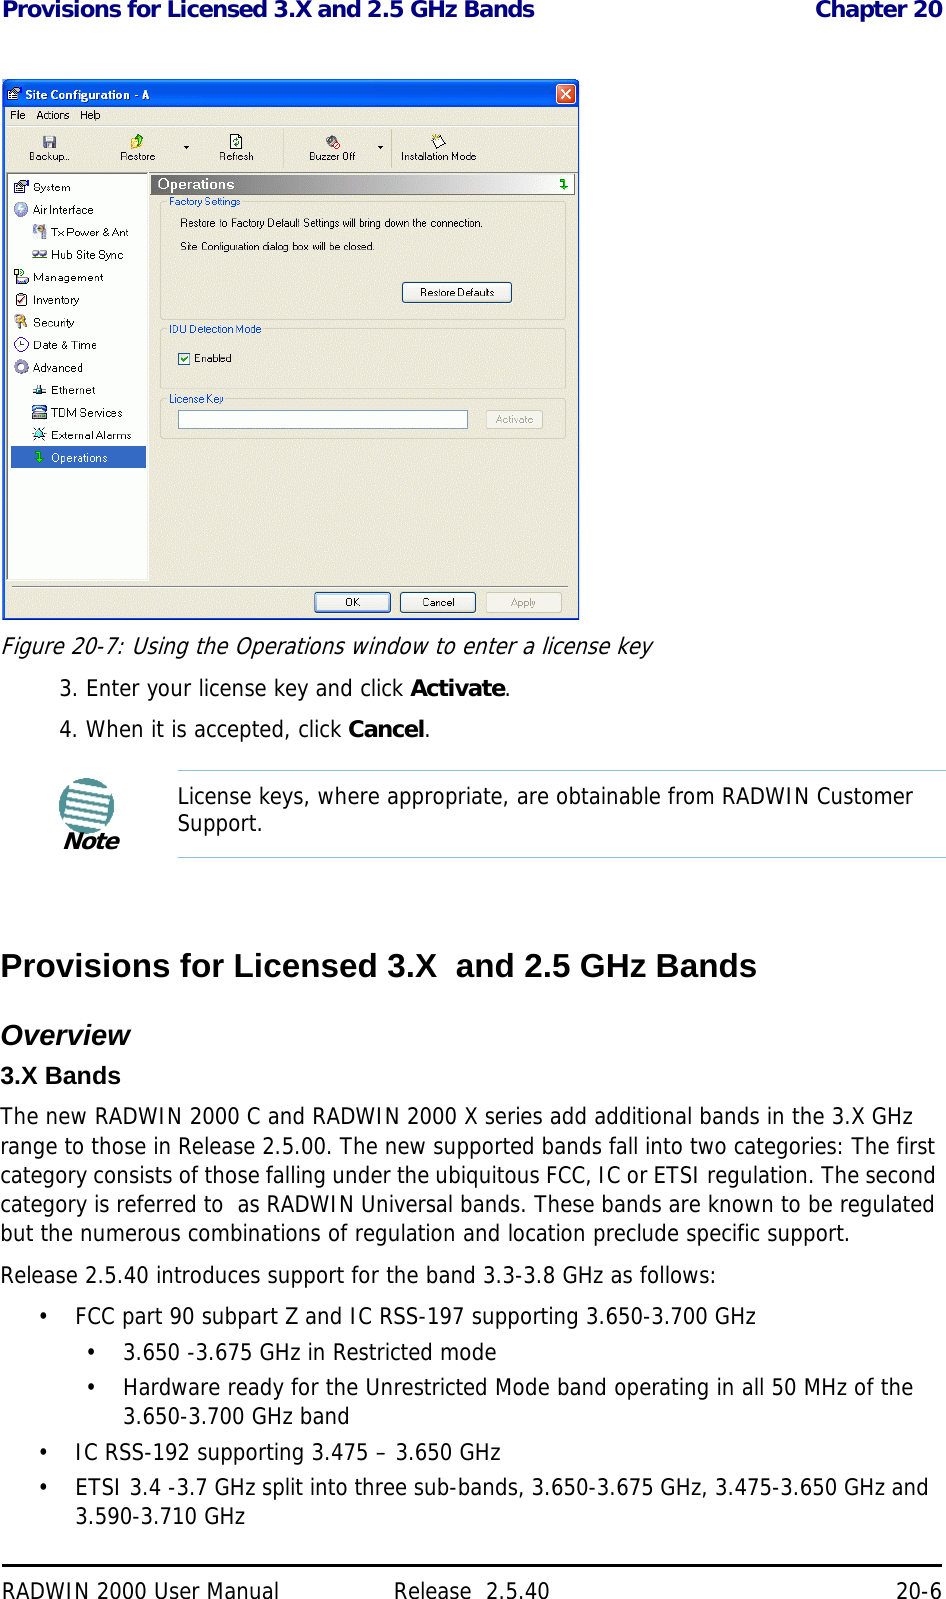 Provisions for Licensed 3.X and 2.5 GHz Bands Chapter 20RADWIN 2000 User Manual Release  2.5.40 20-6Figure 20-7: Using the Operations window to enter a license key3. Enter your license key and click Activate.4. When it is accepted, click Cancel.Provisions for Licensed 3.X  and 2.5 GHz BandsOverview3.X BandsThe new RADWIN 2000 C and RADWIN 2000 X series add additional bands in the 3.X GHz range to those in Release 2.5.00. The new supported bands fall into two categories: The first category consists of those falling under the ubiquitous FCC, IC or ETSI regulation. The second category is referred to  as RADWIN Universal bands. These bands are known to be regulated but the numerous combinations of regulation and location preclude specific support.Release 2.5.40 introduces support for the band 3.3-3.8 GHz as follows:• FCC part 90 subpart Z and IC RSS-197 supporting 3.650-3.700 GHz• 3.650 -3.675 GHz in Restricted mode• Hardware ready for the Unrestricted Mode band operating in all 50 MHz of the 3.650-3.700 GHz band• IC RSS-192 supporting 3.475 – 3.650 GHz• ETSI 3.4 -3.7 GHz split into three sub-bands, 3.650-3.675 GHz, 3.475-3.650 GHz and  3.590-3.710 GHzNoteLicense keys, where appropriate, are obtainable from RADWIN Customer Support.